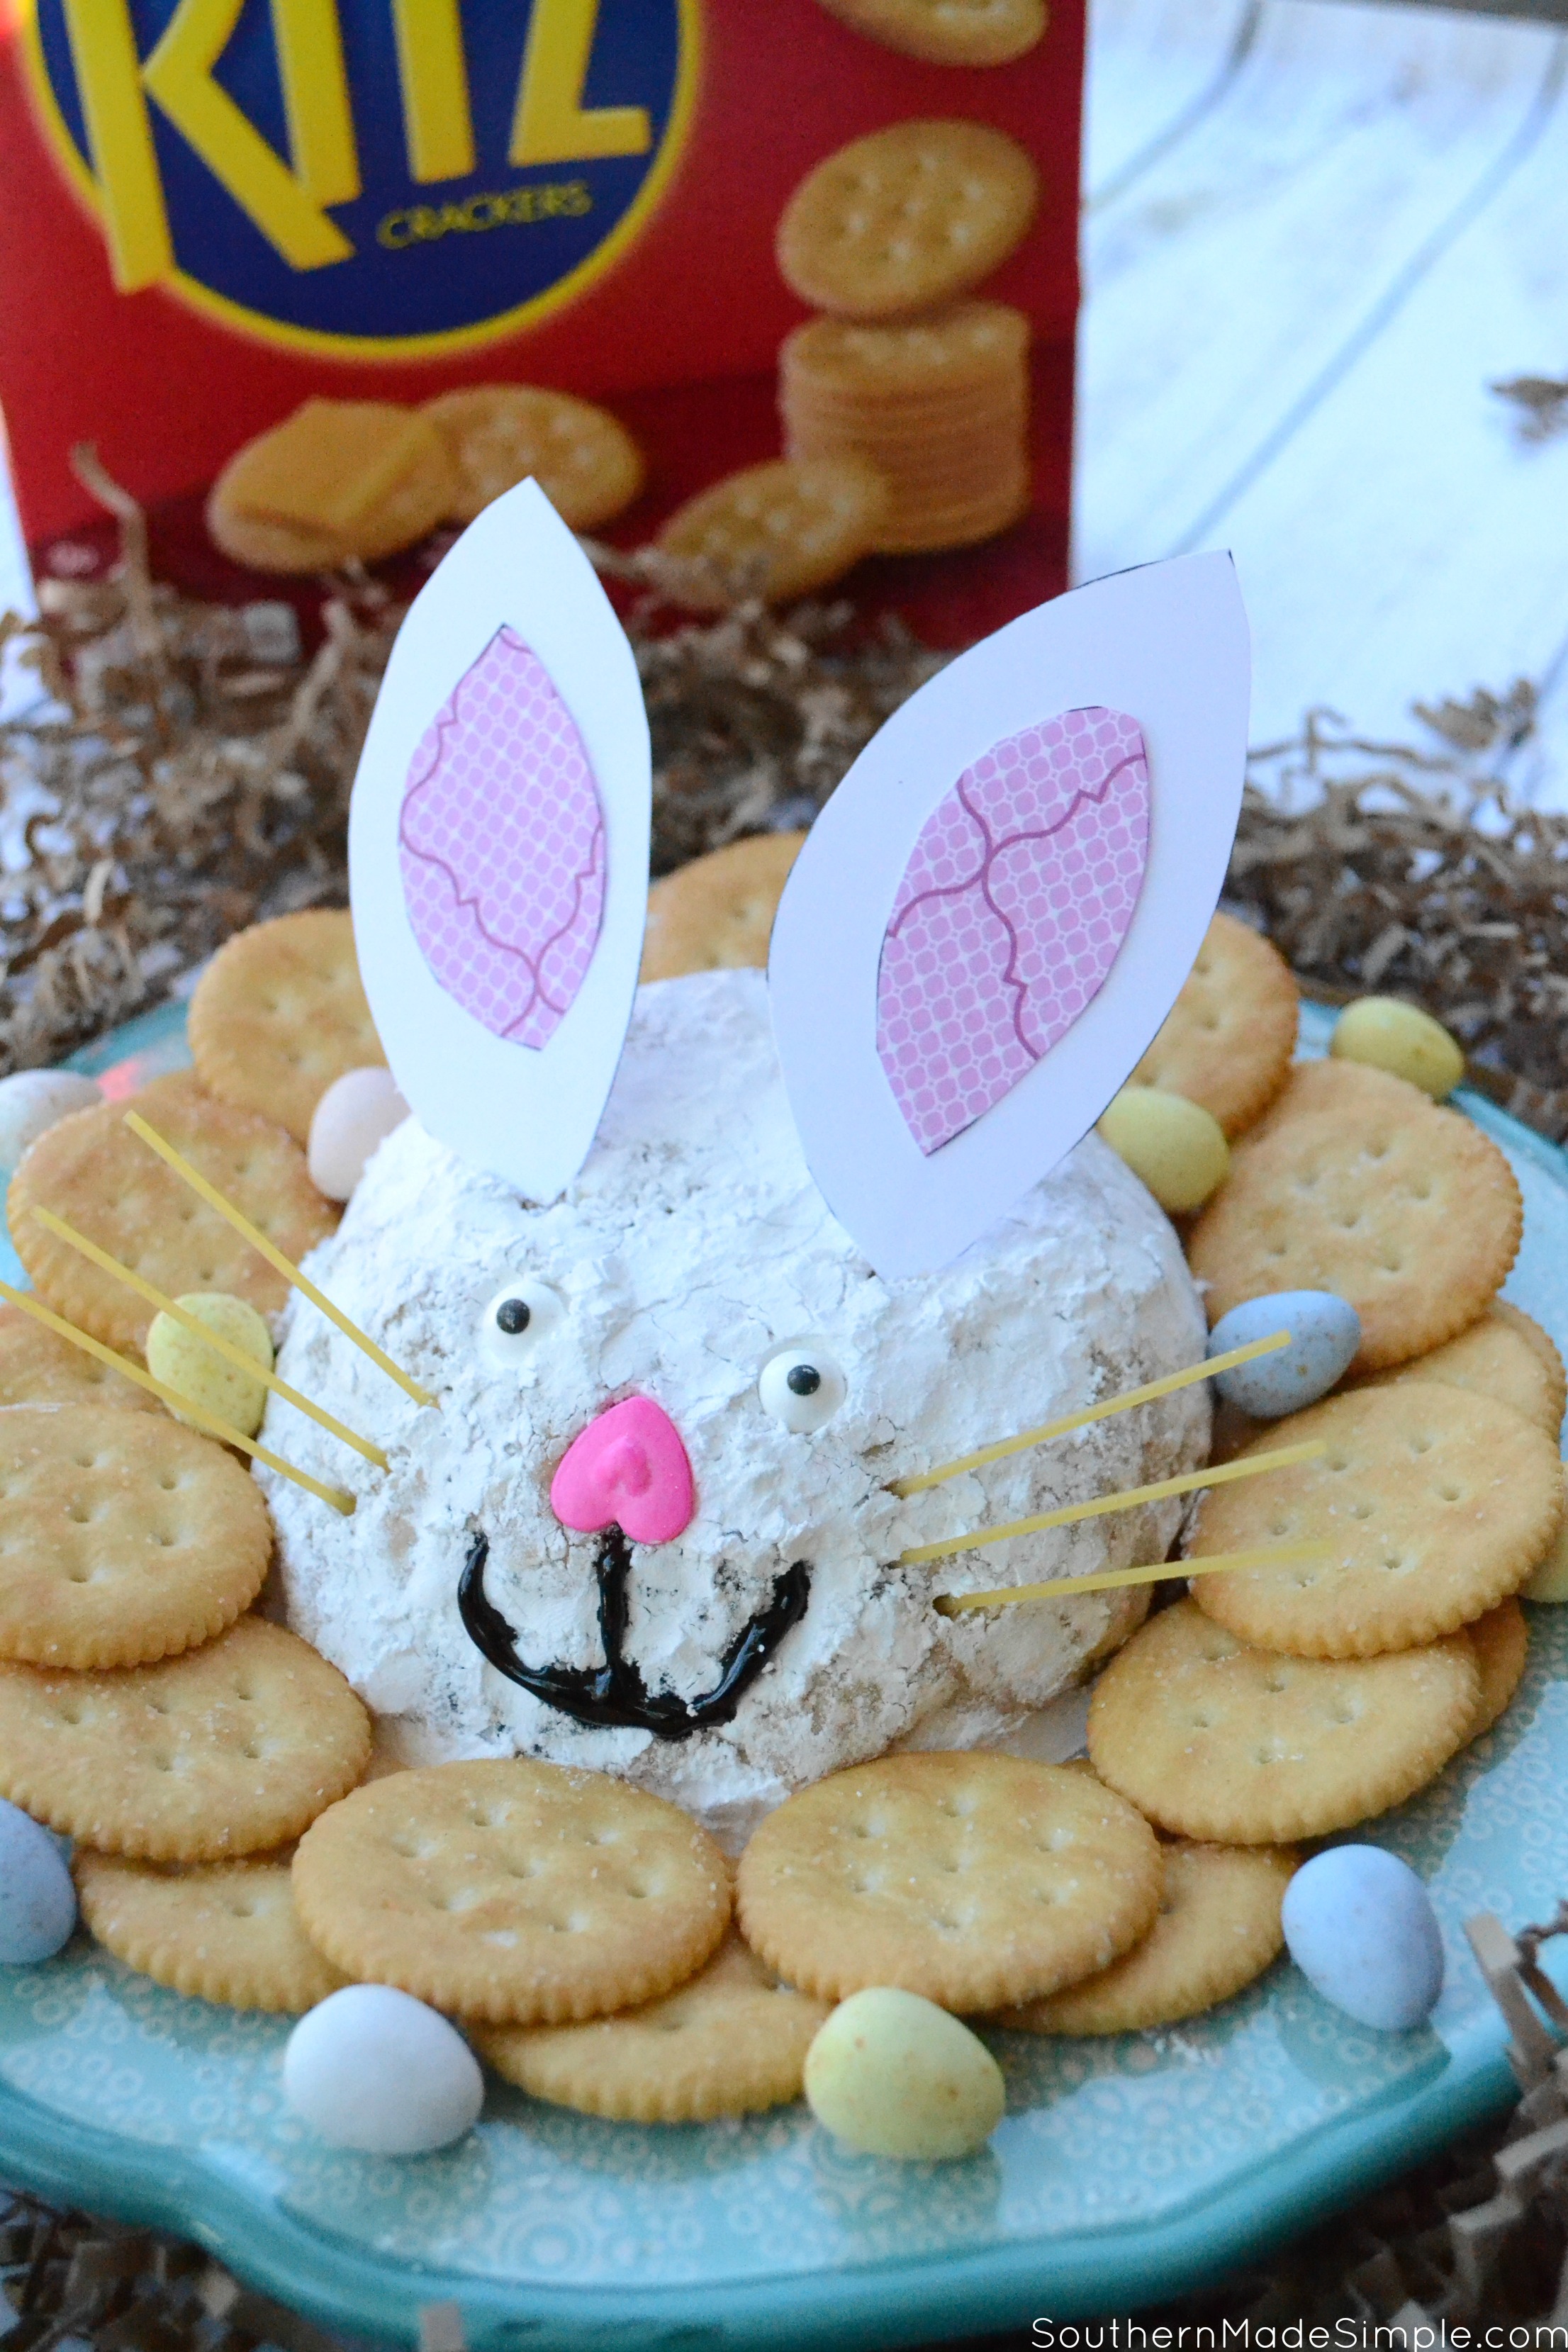 Looking for a quick sweet treat to share with others this spring? This easy Easter Bunny Peanut Butter Cheese Ball will make any gathering a hoppin' good time! #RITZpiration #ad Visit @Walmart in stores 4/15/17 for an in store demo, recipes and more!